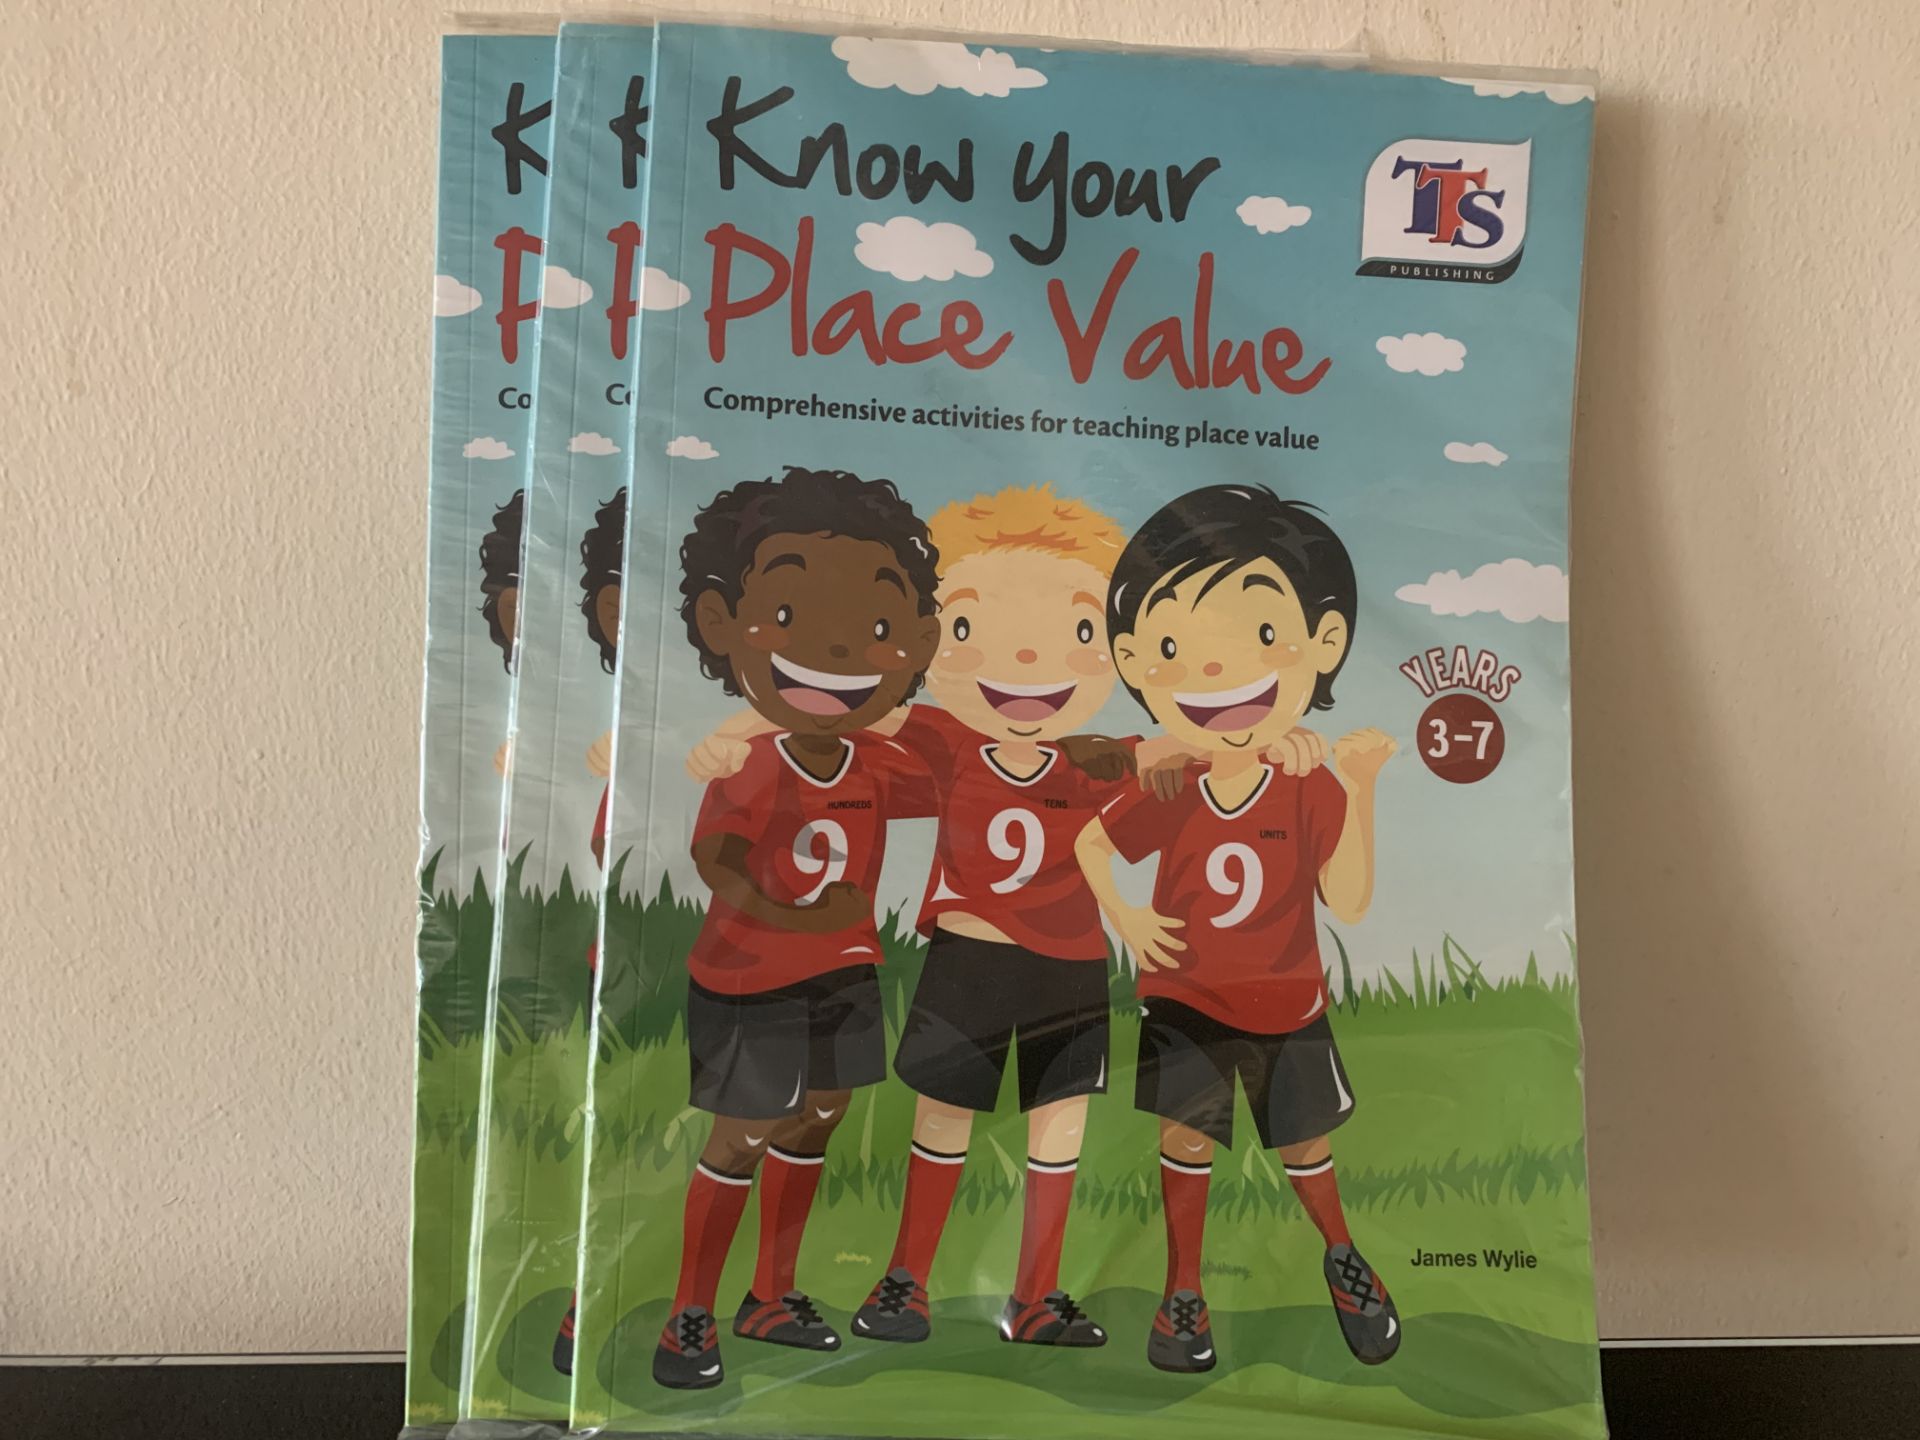 20 X TTS KNOW YOUR PLACE VALUE BOOKS YEARS 3 - 7 BY JAMES WYLIE